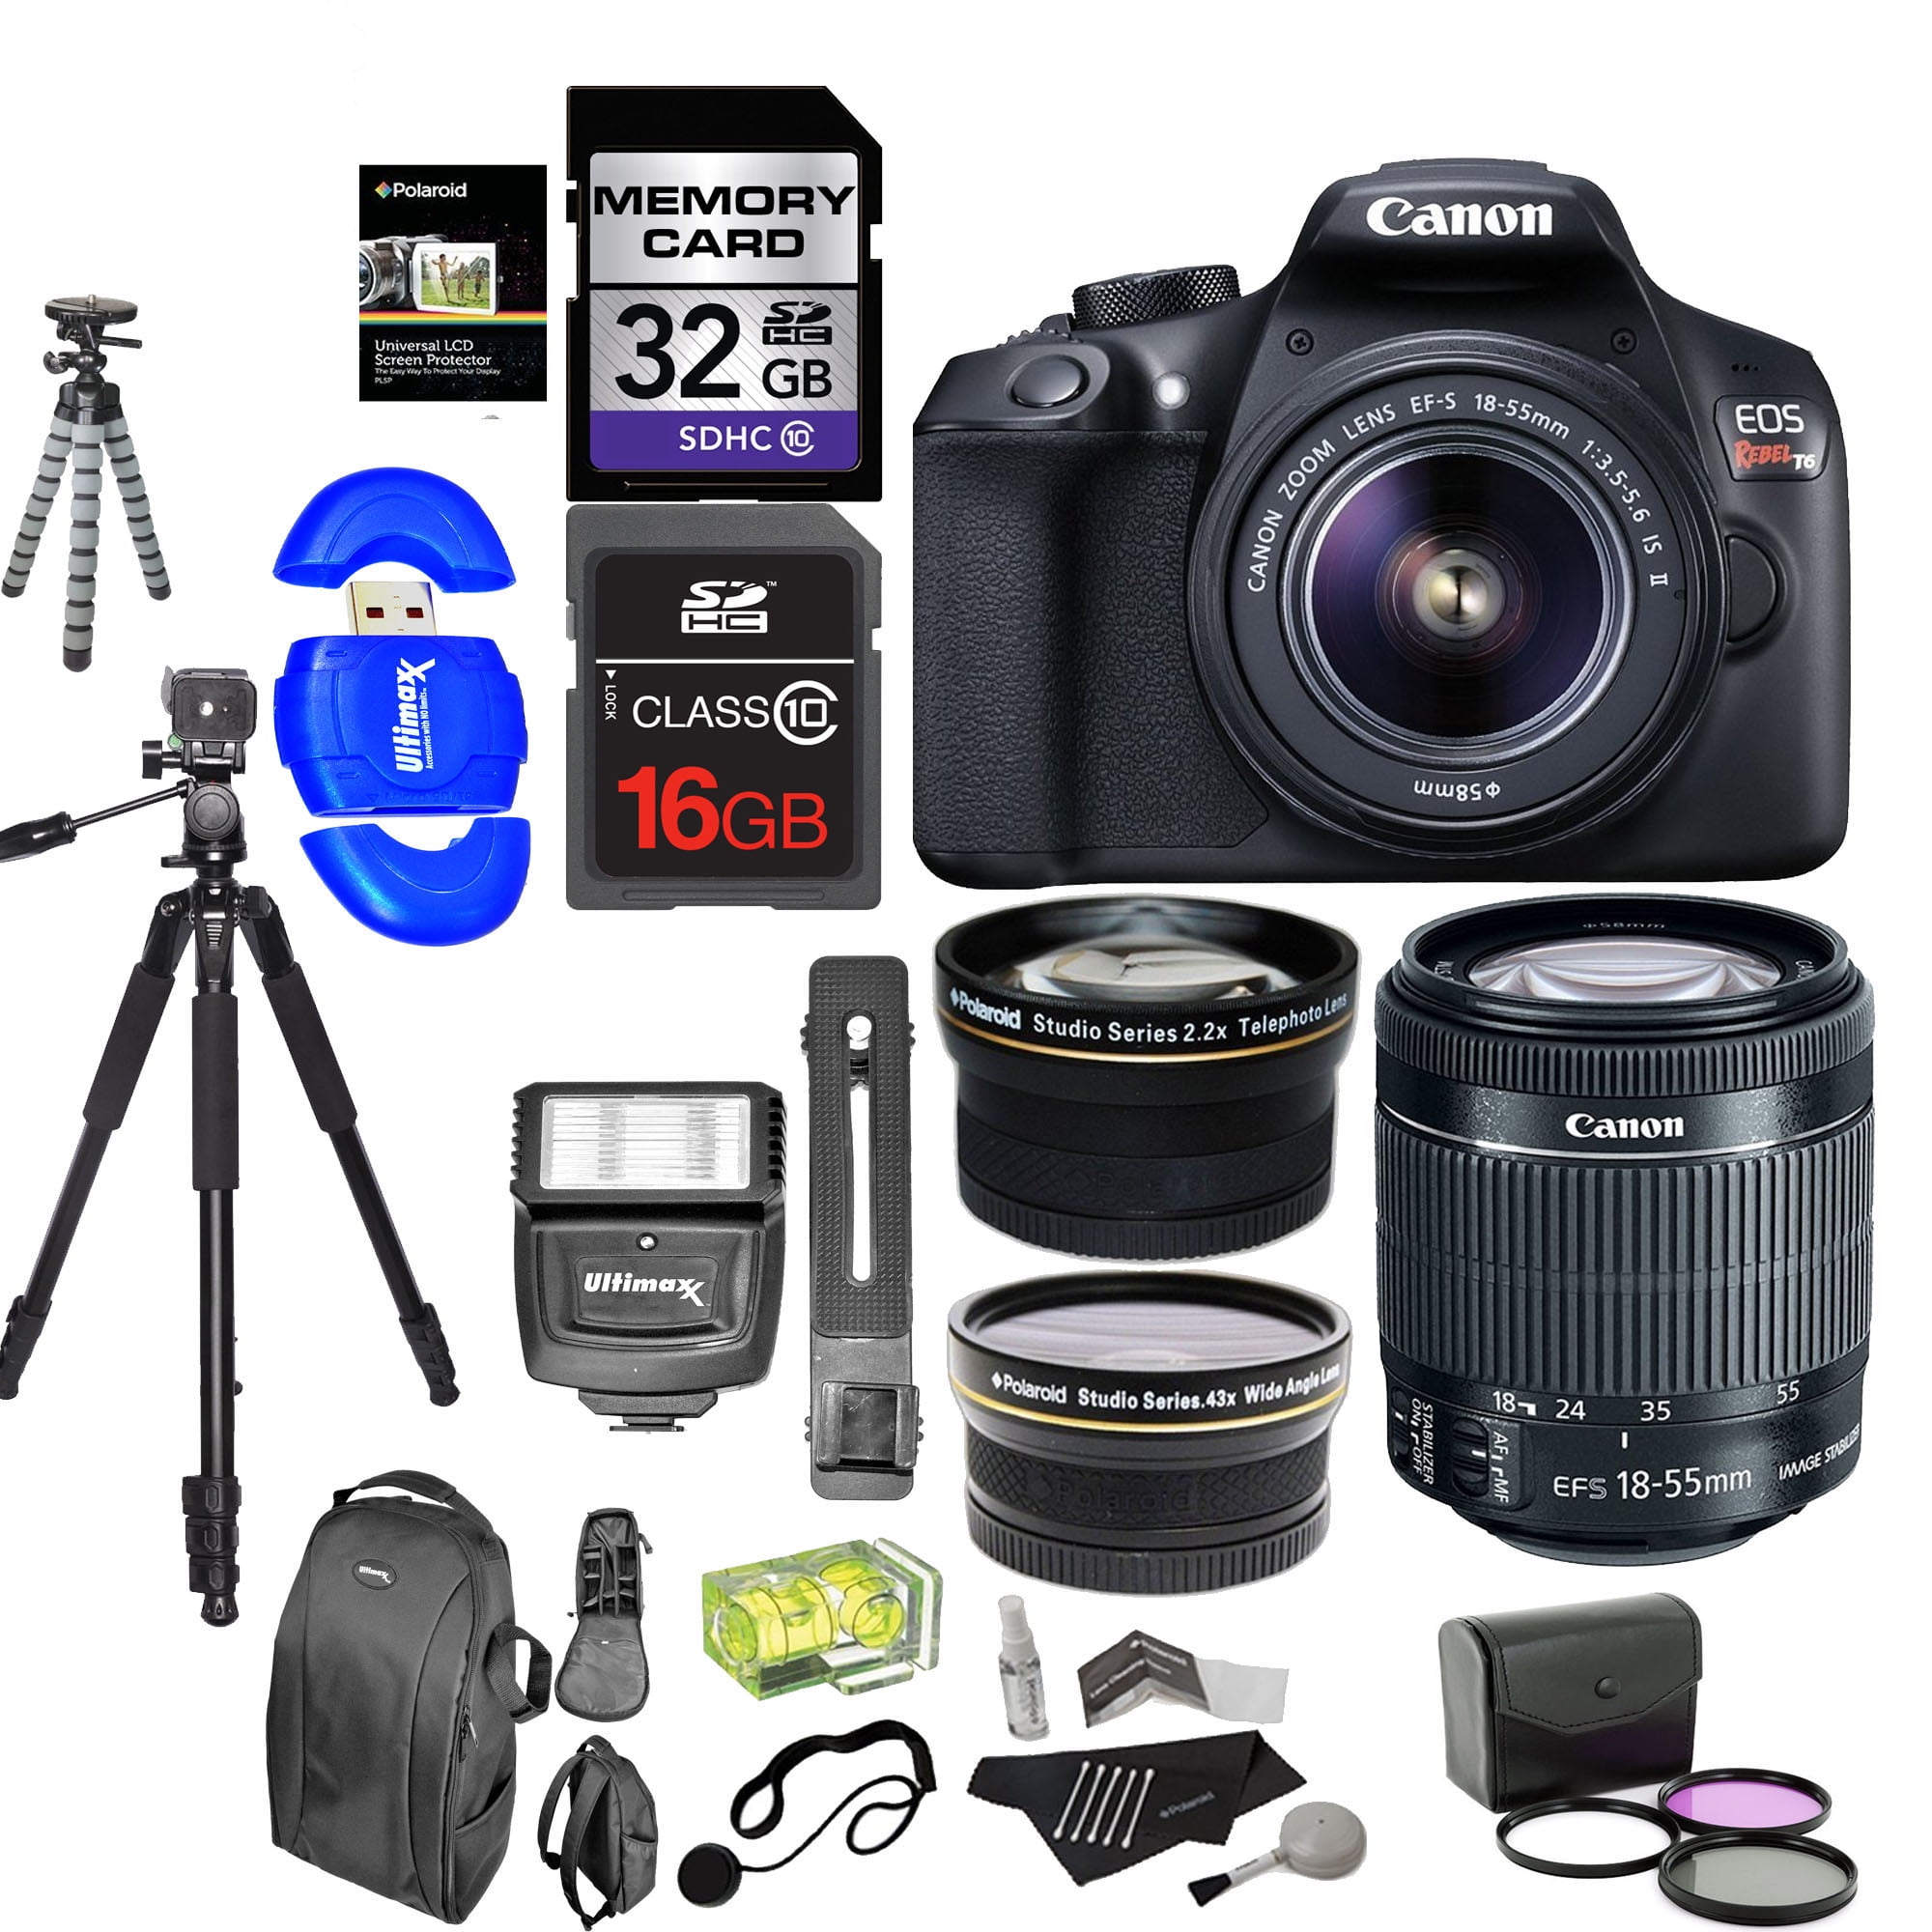 Canon EOS Rebel T7 DSLR Camera Bundle w/ Canon EF-S 18-55mm f/3.5-5.6 is II  Lens + 2pc SanDisk 64GB Memory Cards, Wide Angle Lens, Telephoto Lens, 3pc